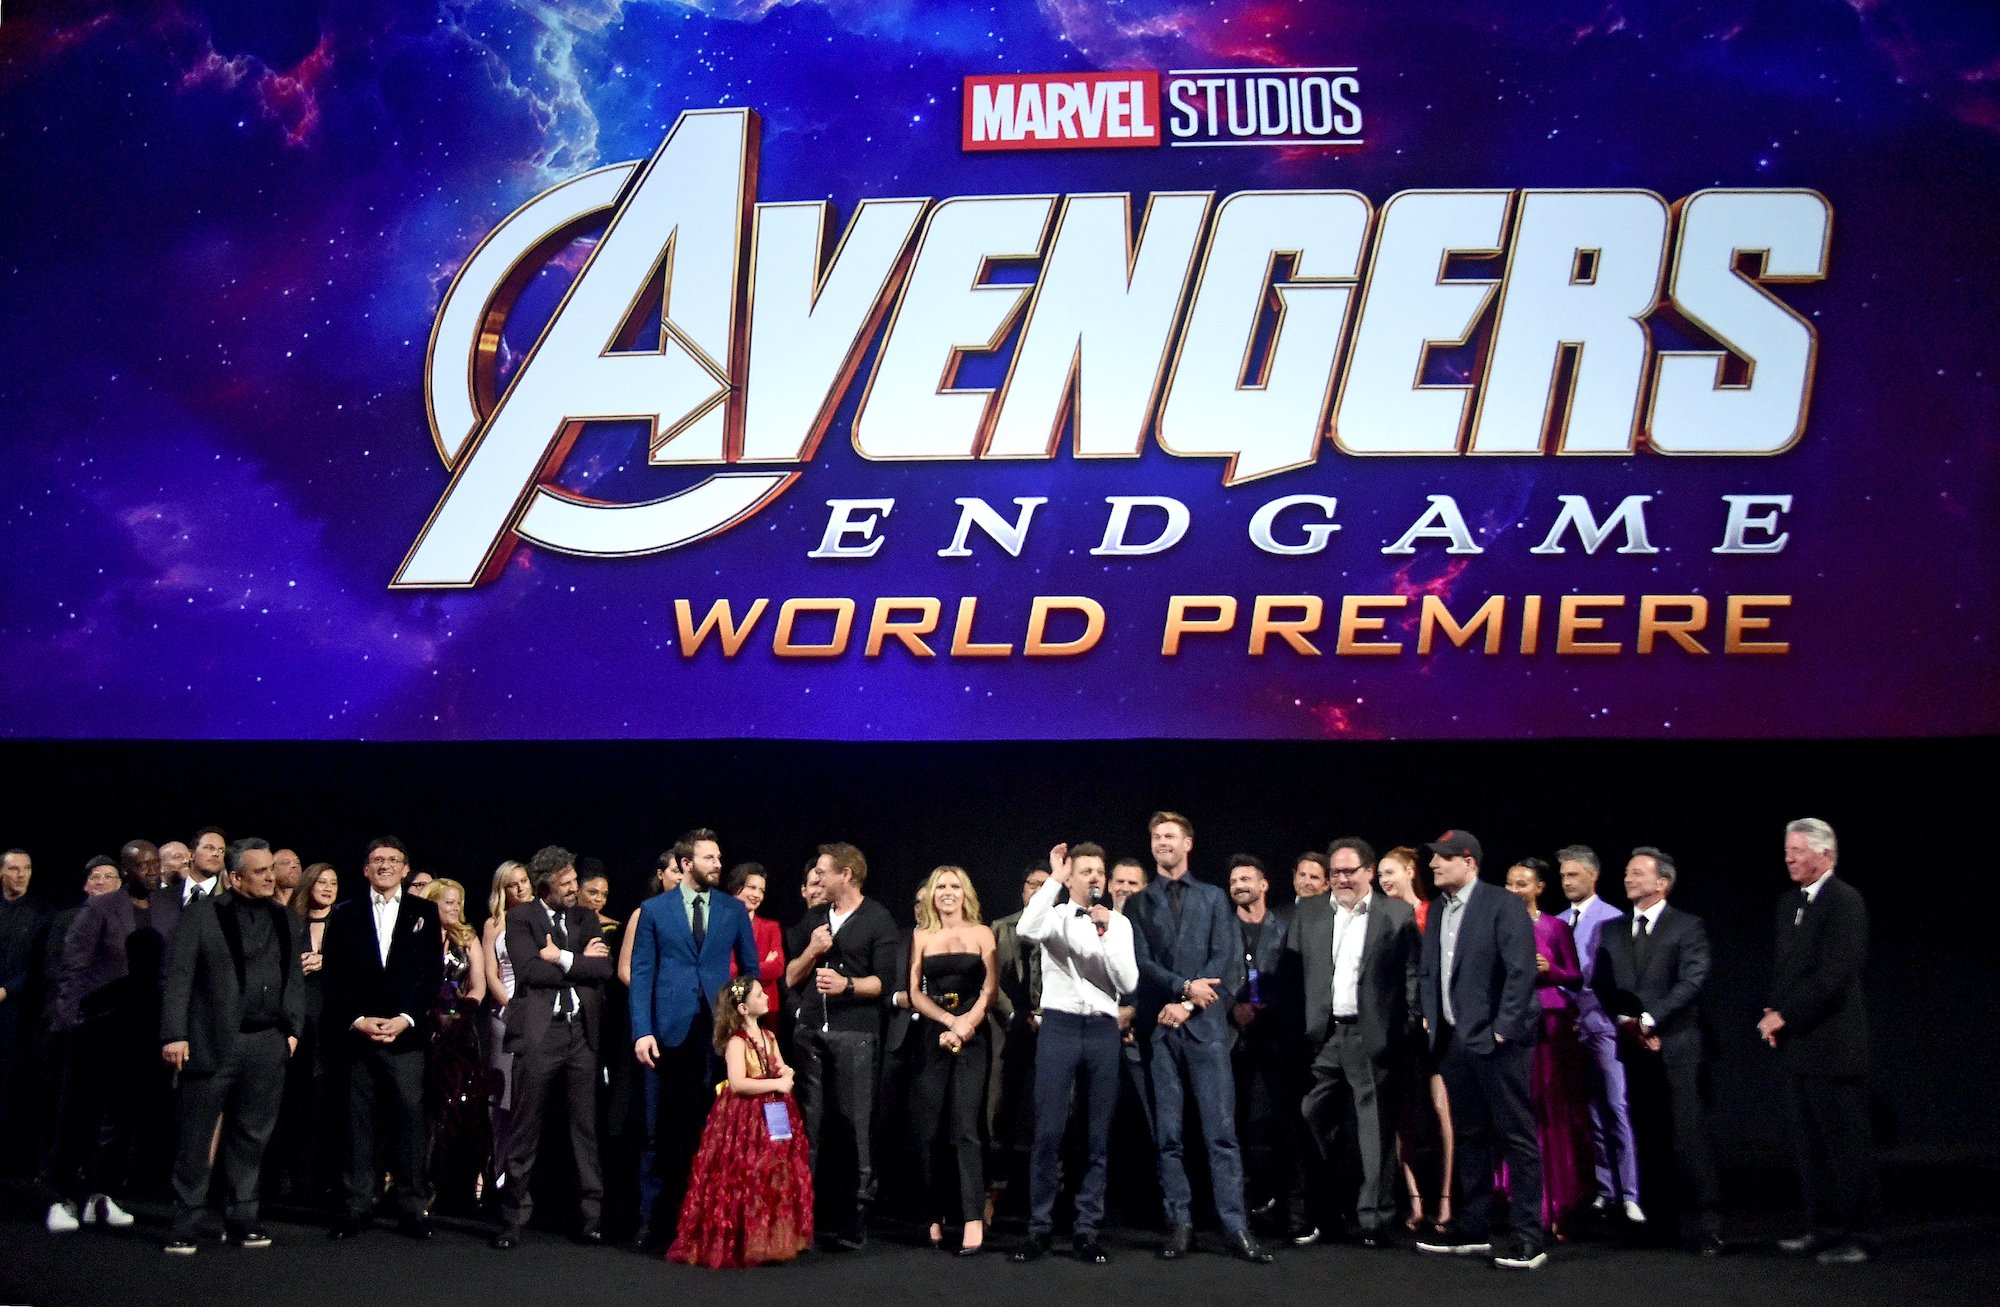 ‘Avengers: Endgame’: Even 2 Years Later, Fans Still Can’t Stop Crying